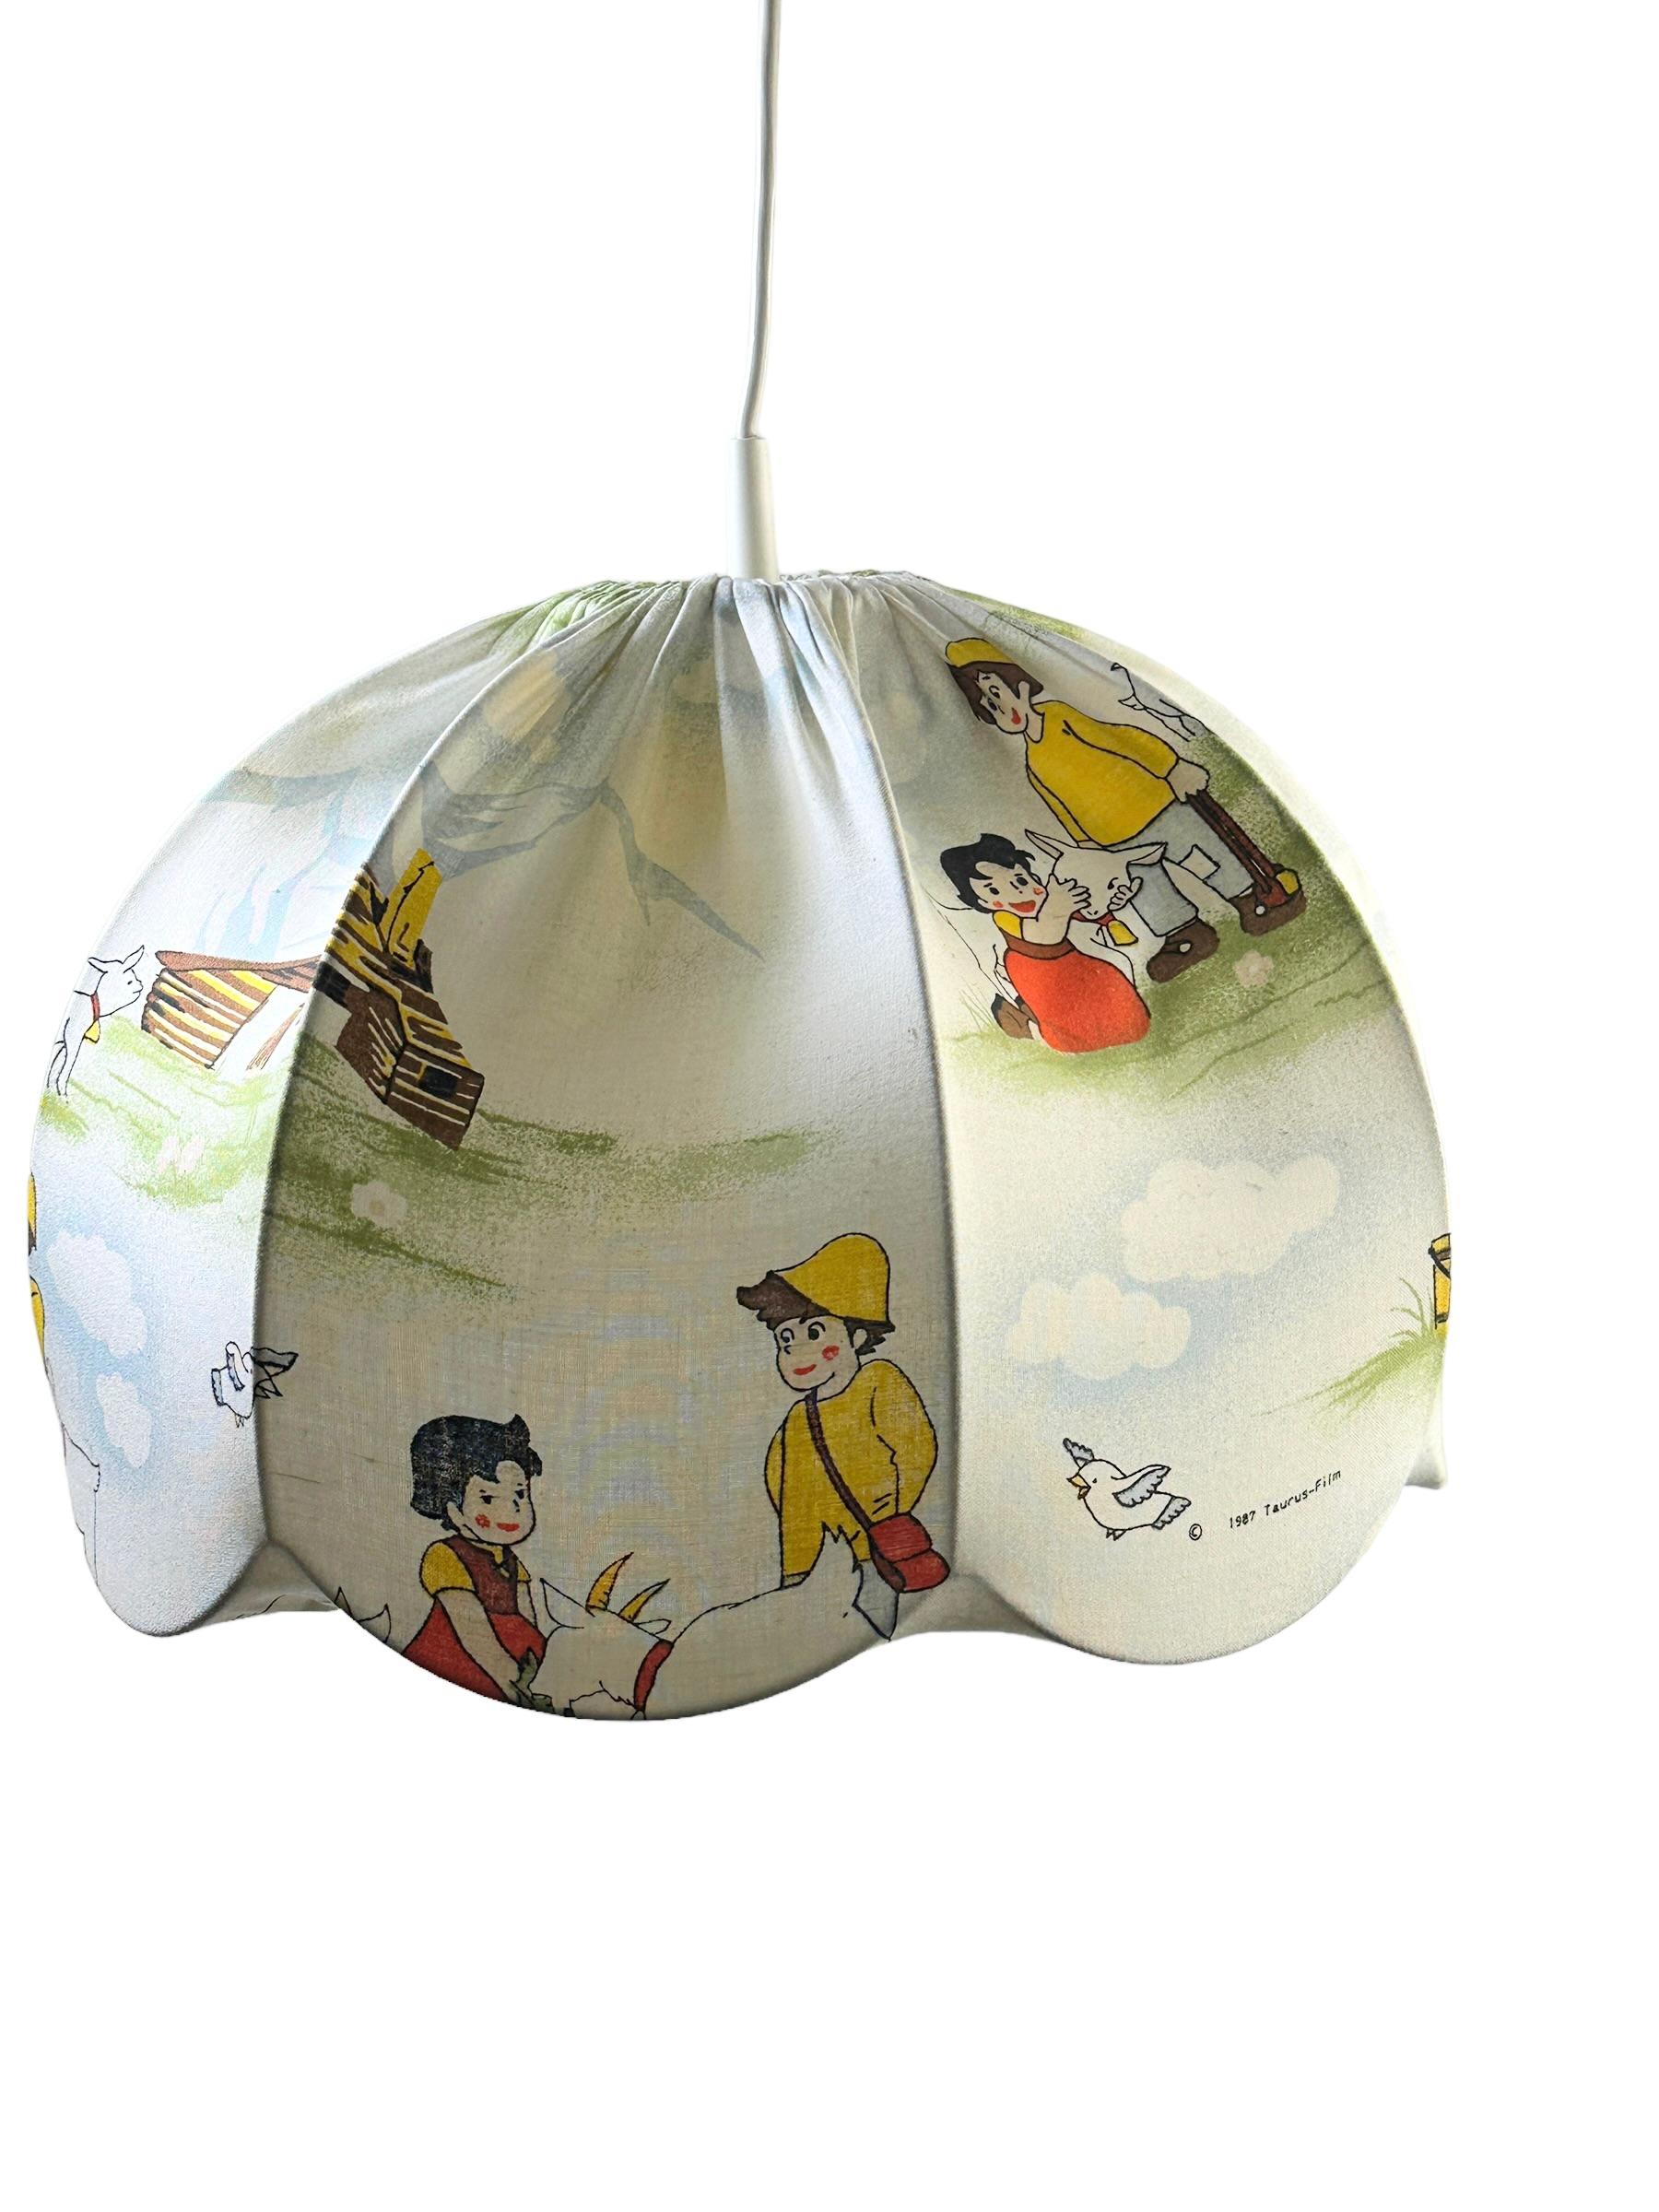 Late 20th Century Heidi Girl of the Alps Children's Room Pendant Ceiling Lamp Vintage German, 1987 For Sale